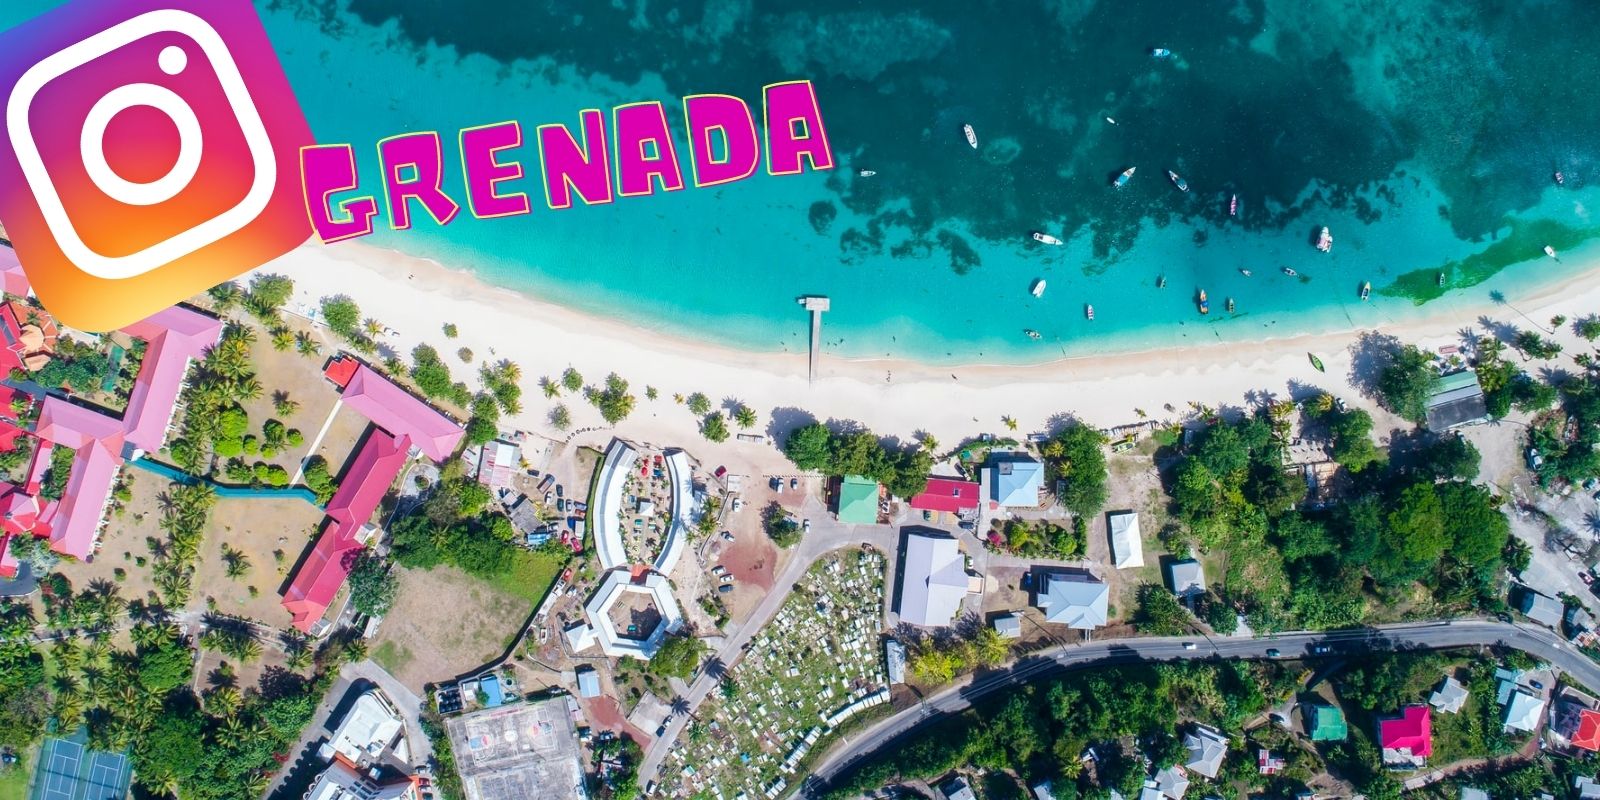 Take an Instagram tour of the best things to do in Grenada